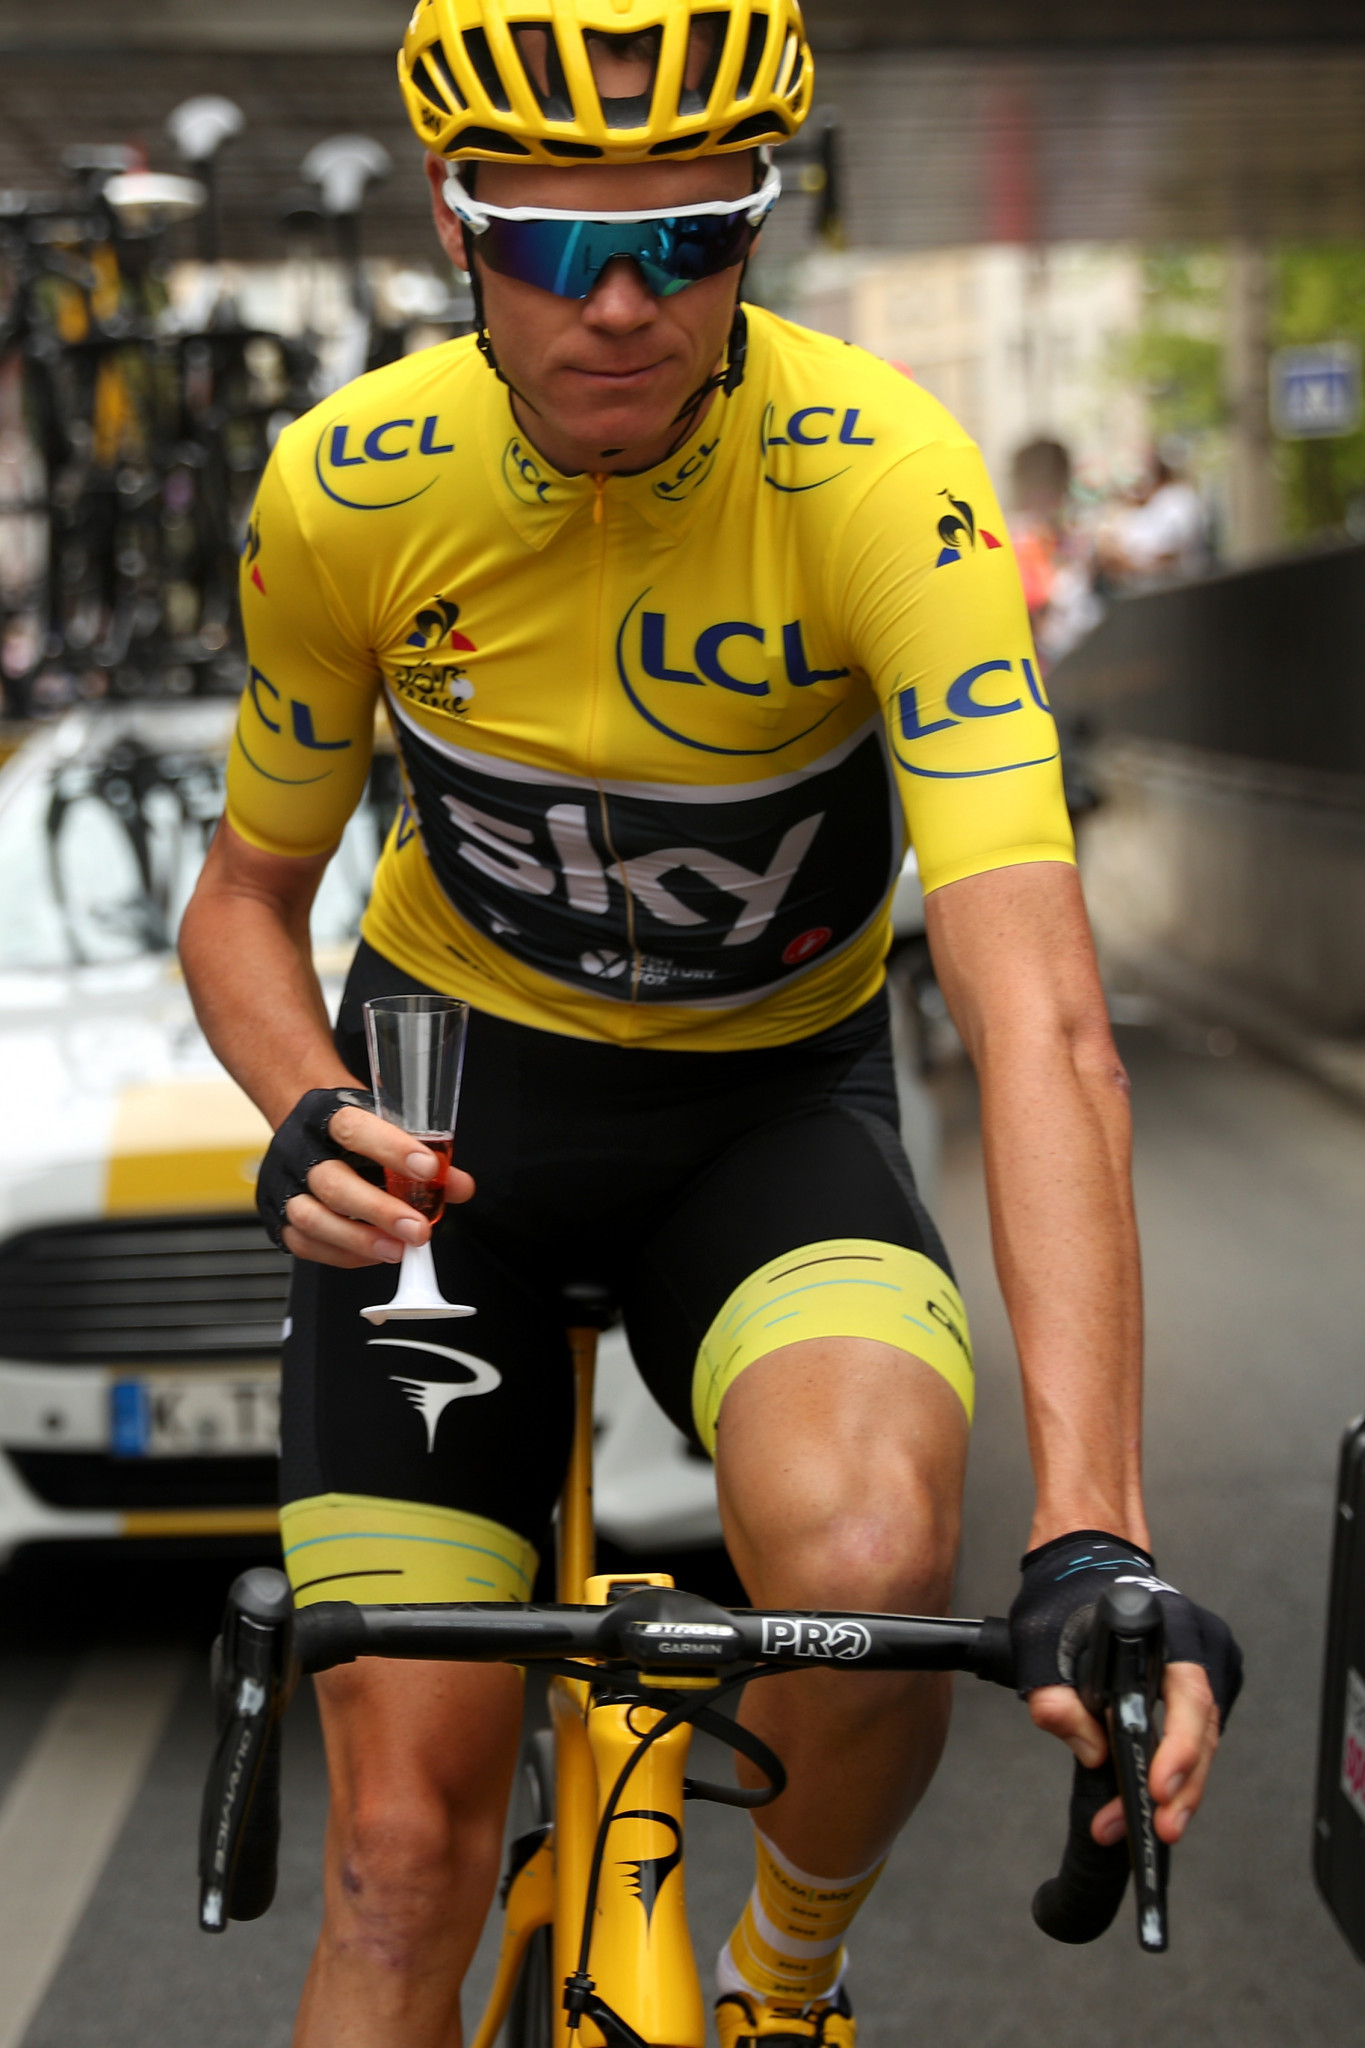 Chris Froome is hoping to make more history at the Tour de France ©Getty Images